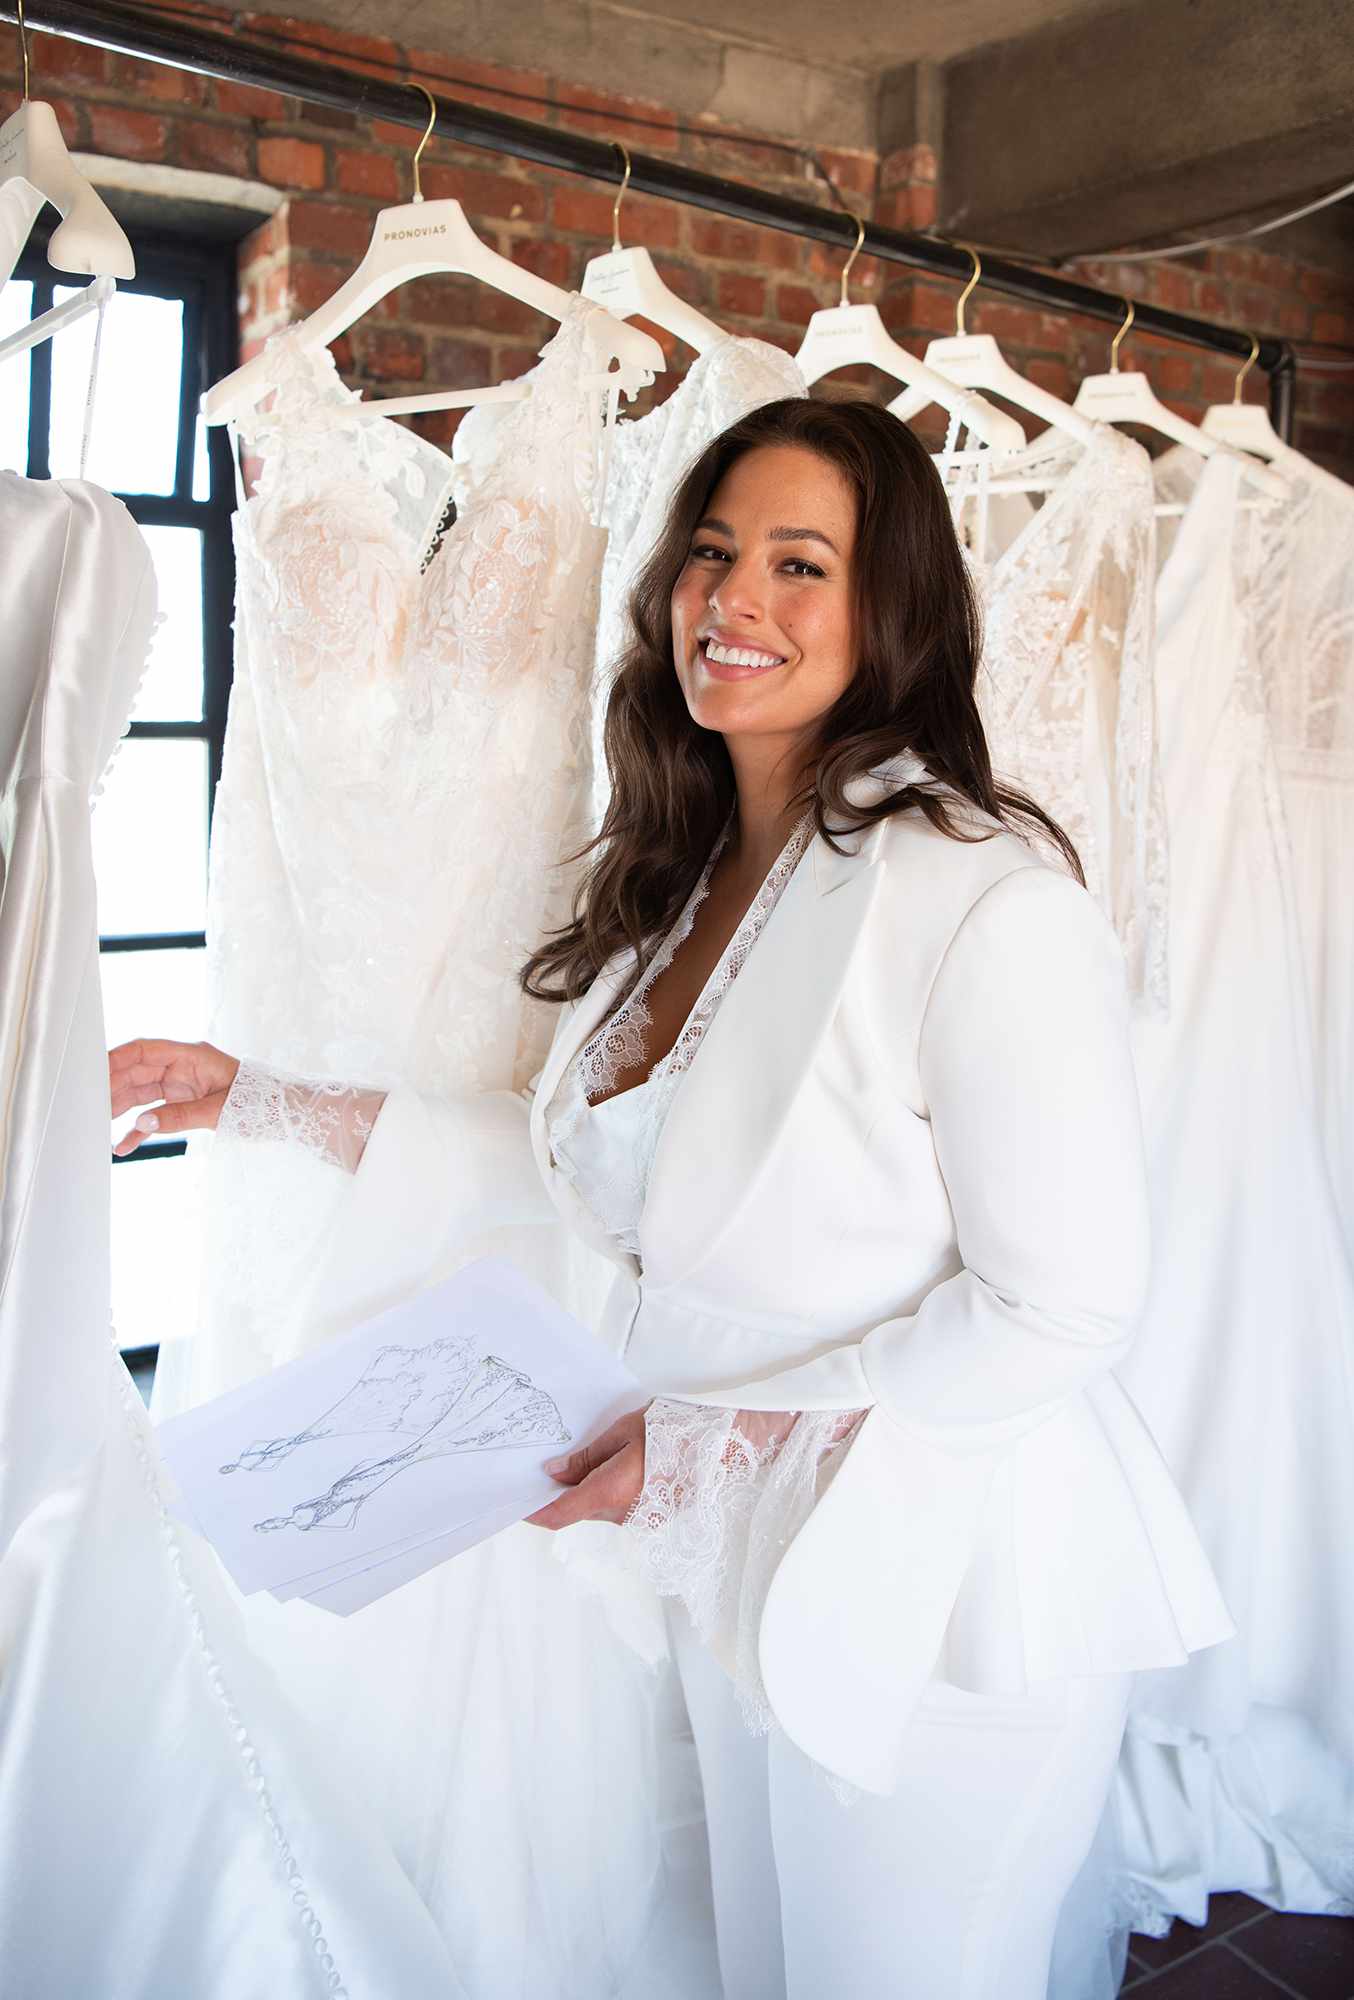 Ashley Graham Partners with Pronovias on Second Bridal Collection: ‘Every Woman Deserves to Feel Beautiful’